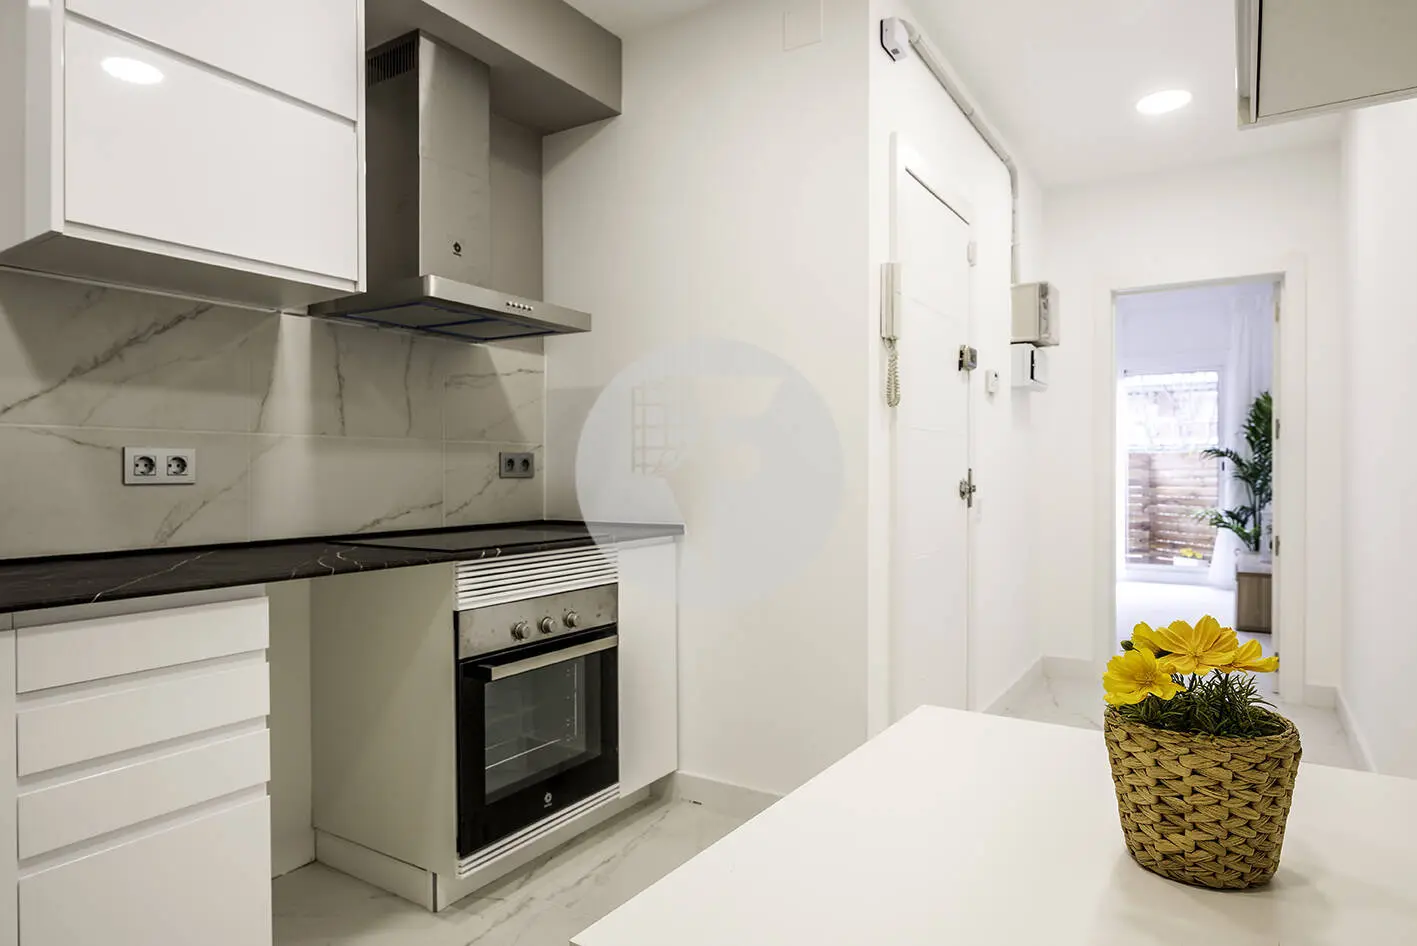 Brand new completely renovated apartment on Aragó street in the heart of El Clot in Barcelona. 16